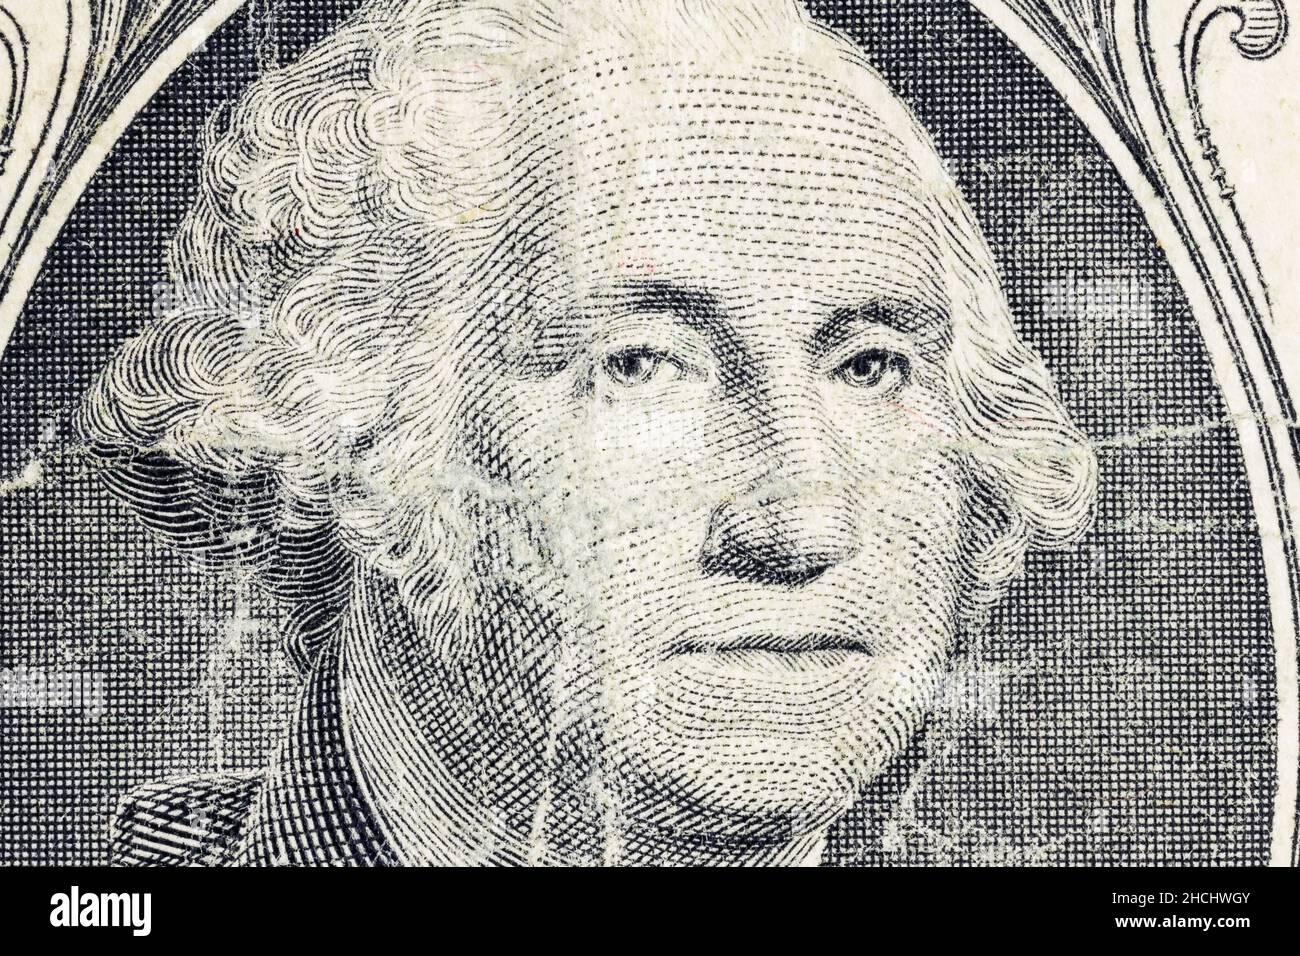 1 US Dollar Made In 1988. George Washington Portrait On The 1 US Dorllar  Banknote Stock Photo, Picture and Royalty Free Image. Image 61983771.